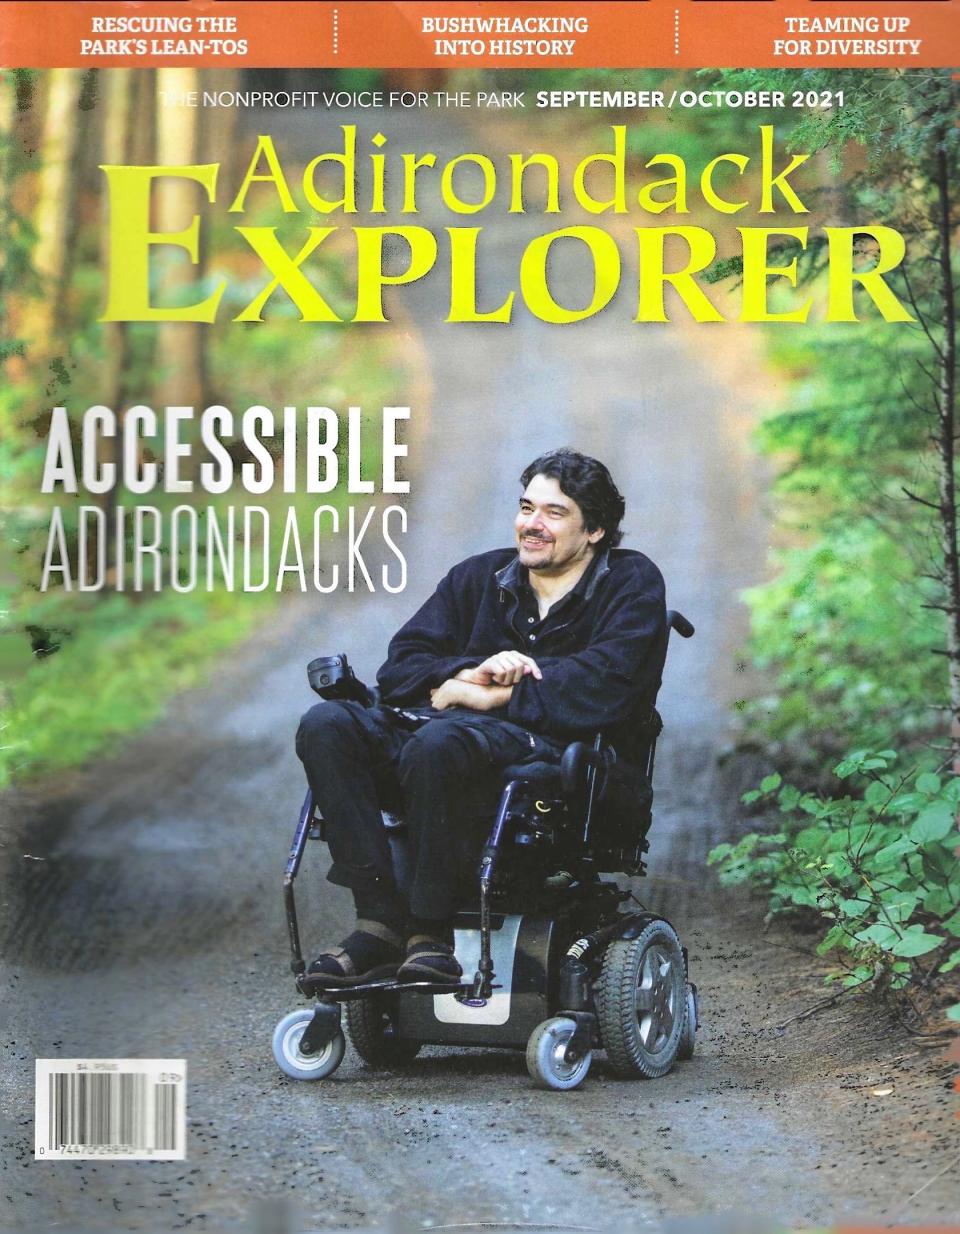 The cover of the magazine Adirondack Explorer, showing the author in his wheelchair.